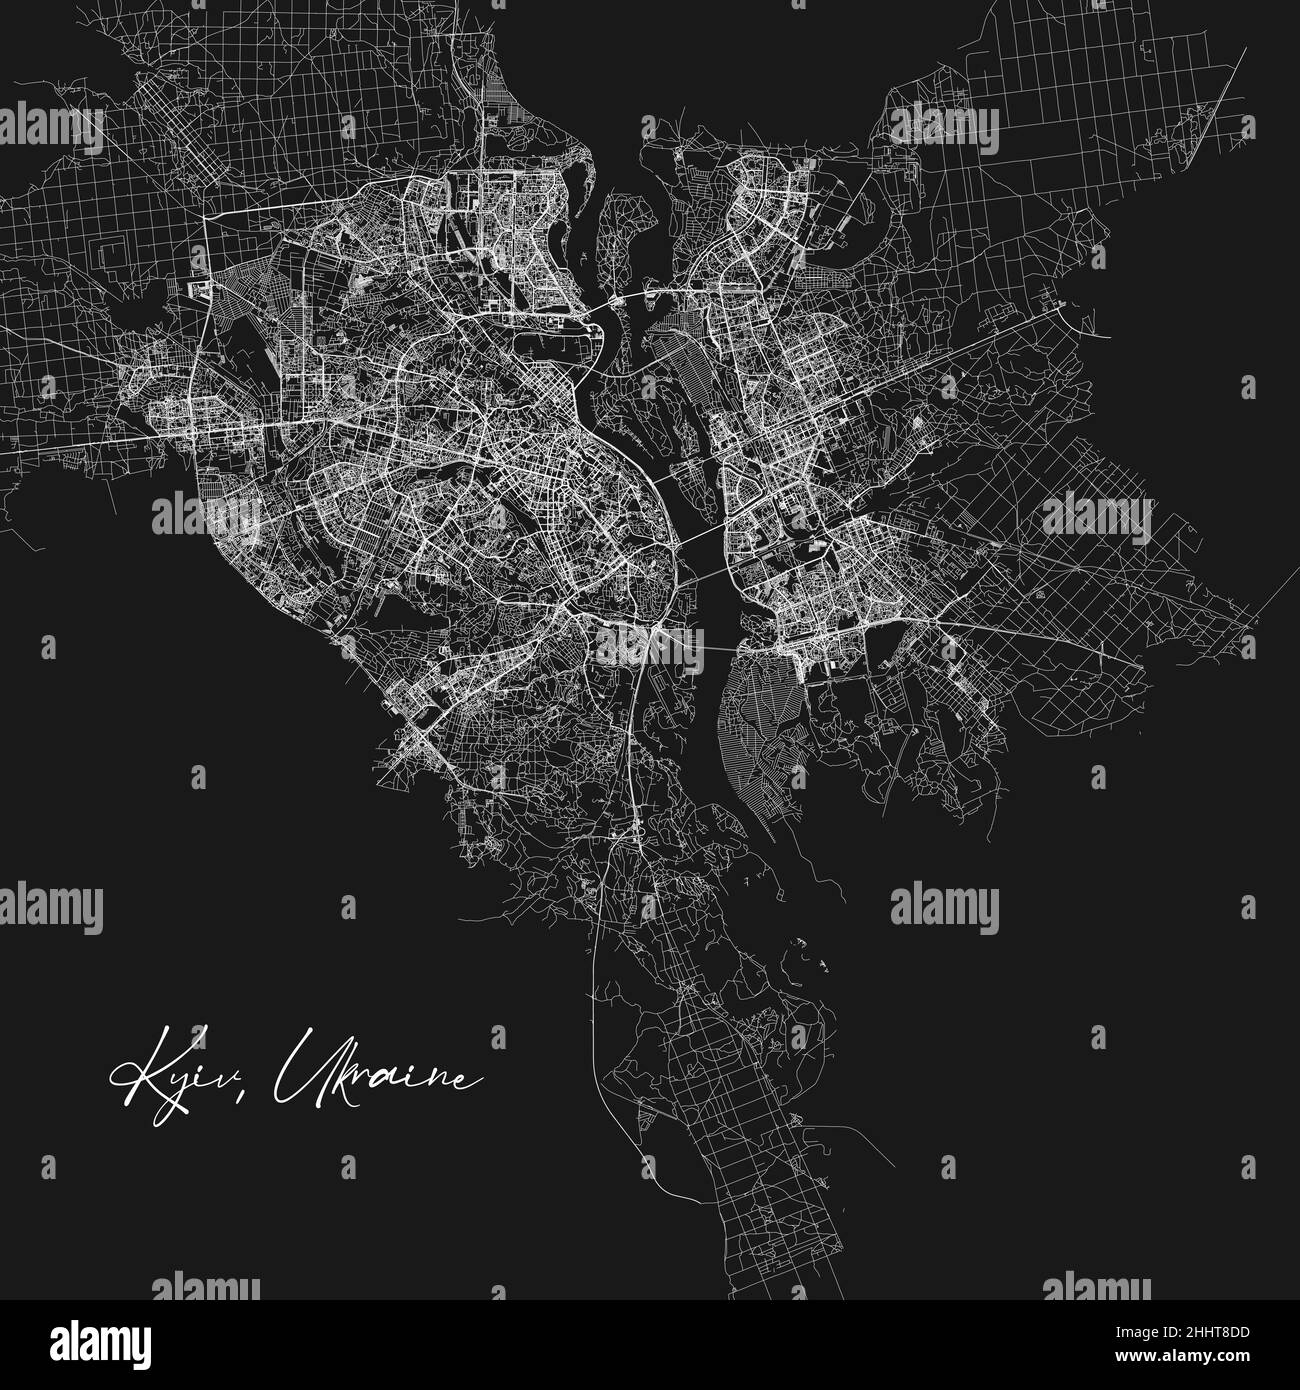 Kyiv Kiev black and white city map. Vector illustration, Kyiv Kiev map grayscale art poster. Street map image with roads, metropolitan city area view. Stock Vector